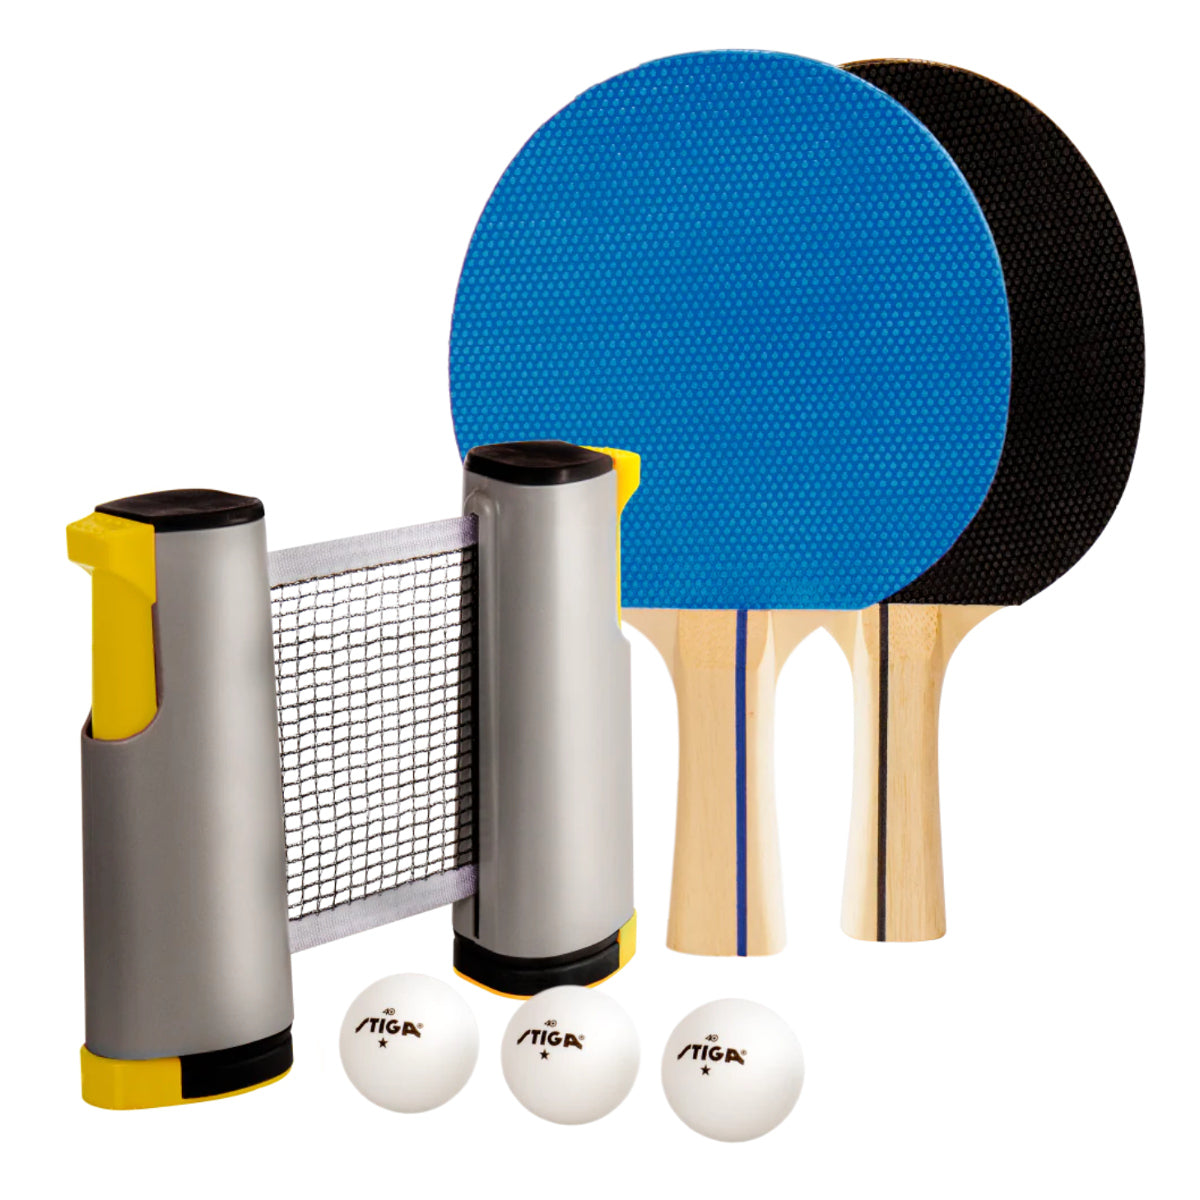 STIGA All-in-One Retractable Ping Pong Net Set (2021 Edition)